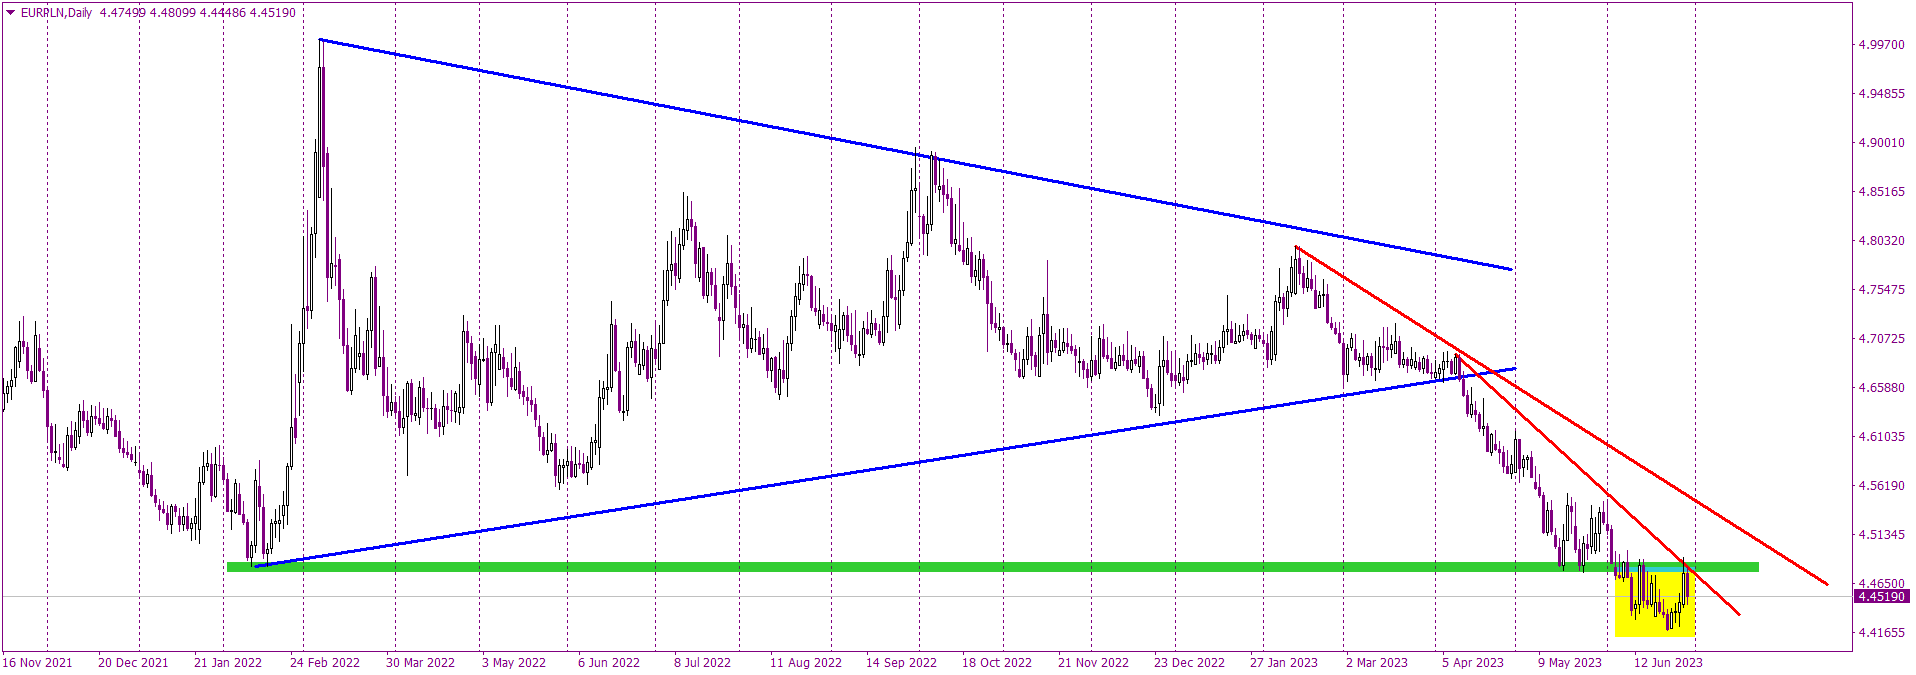 EURPLN’s Battle with the 4.48 Resistance